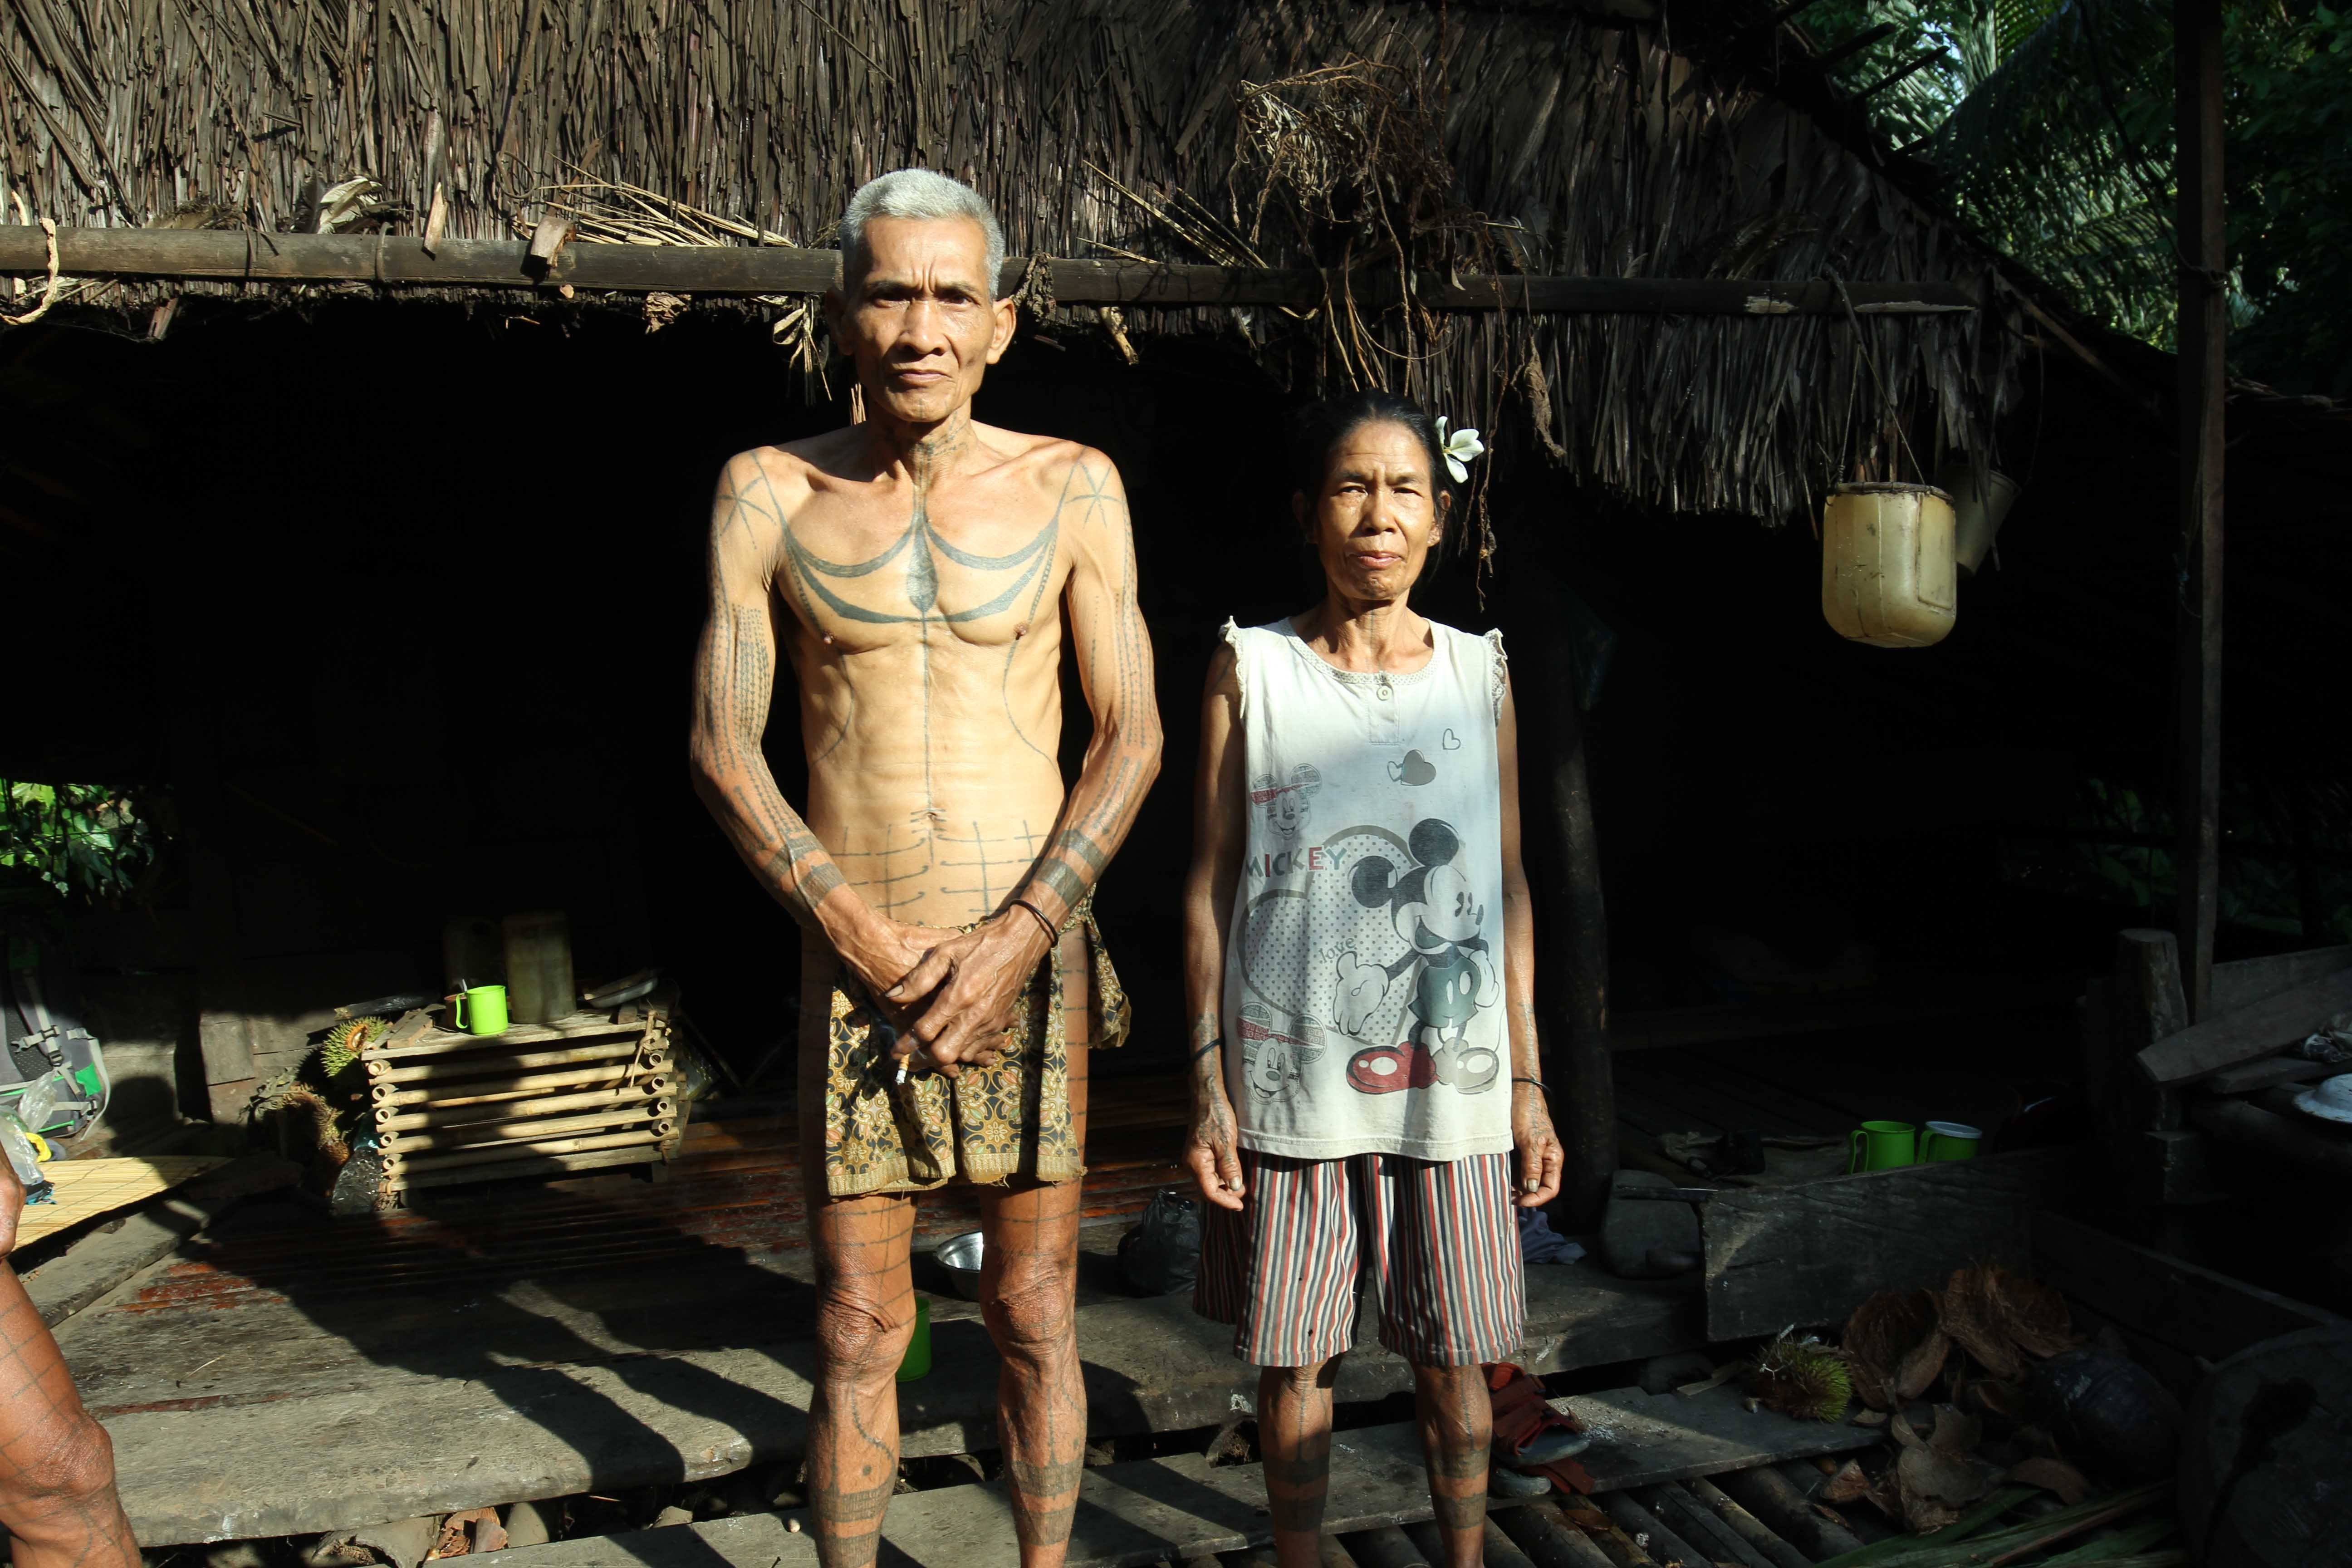 Teu Takbabalen and his wife at a pig farm in Siberut Mentawai Islands. Image by Febrianti. Indonesia, 2020.